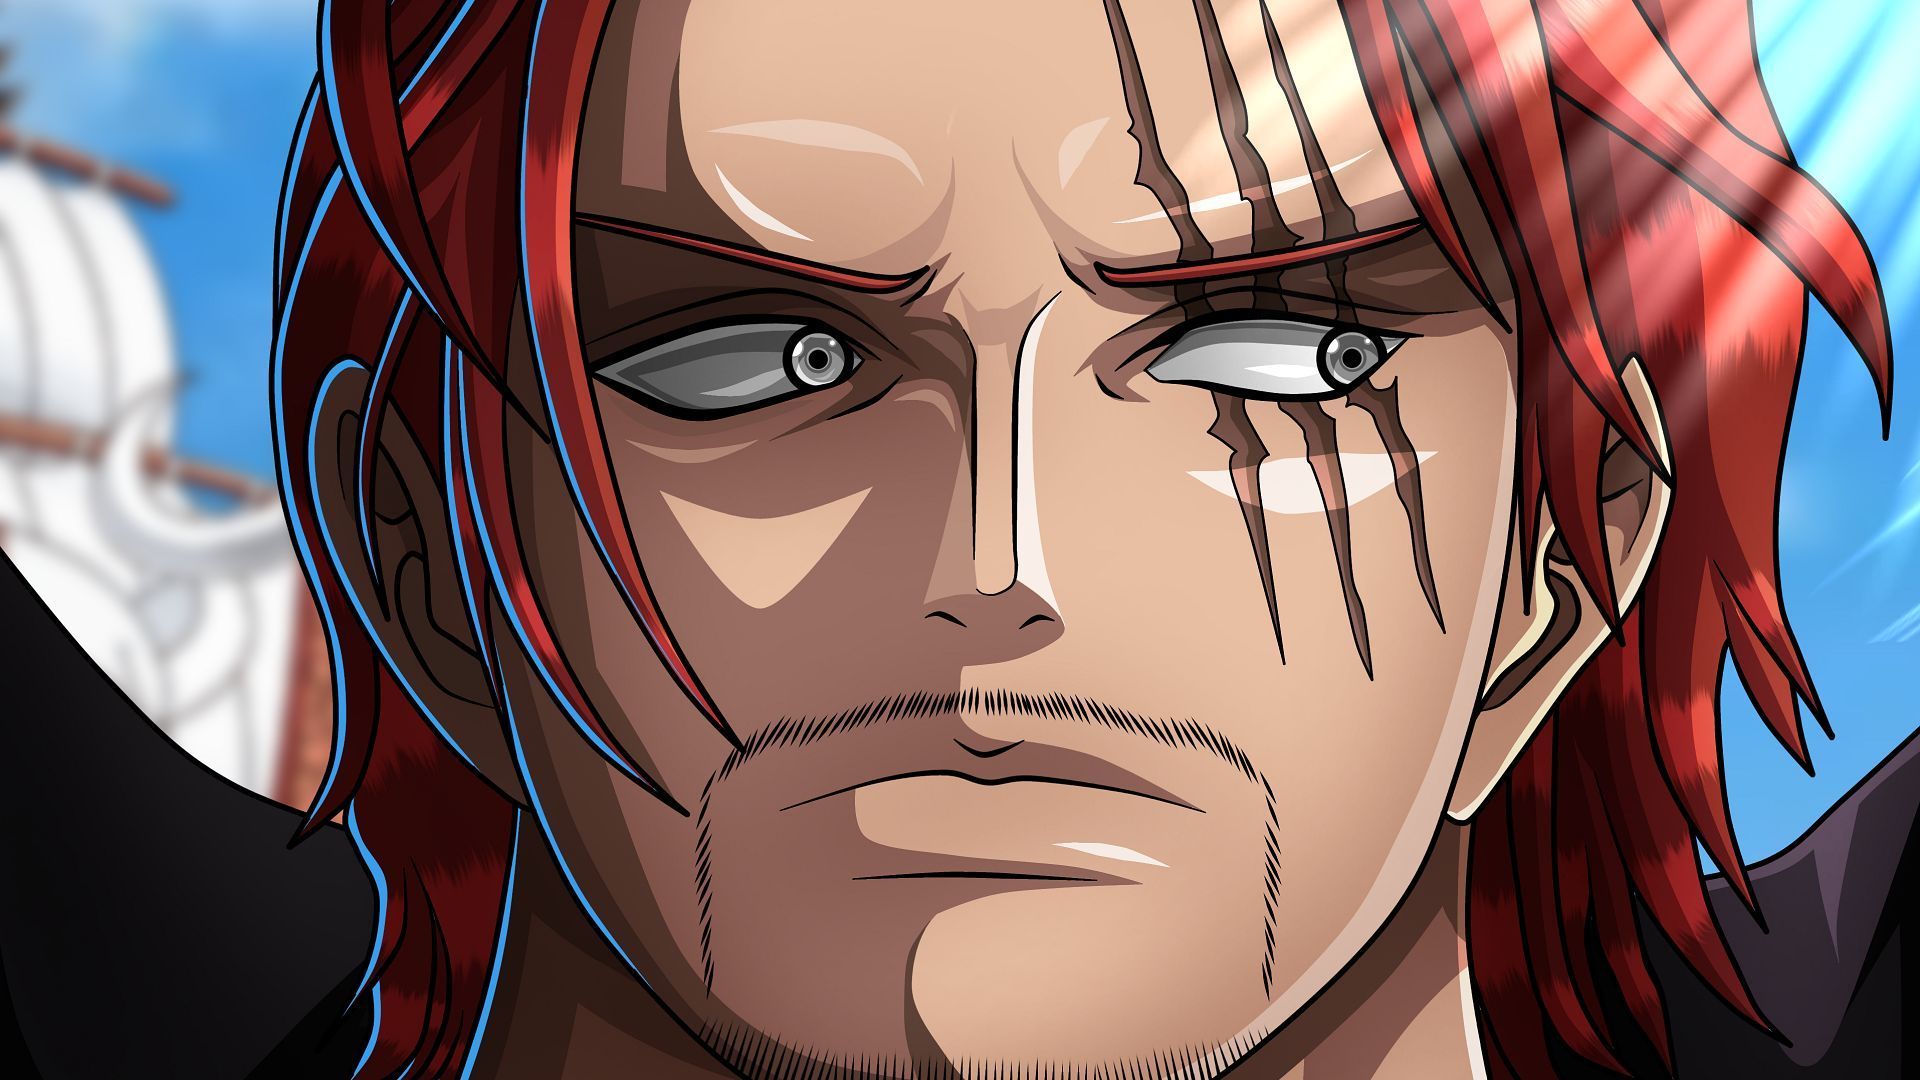 &quot;Red Hair&quot; Shanks was the absolute protagonist of One Piece 1079 (Image via Eiichiro Oda/Shueisha, One Piece)